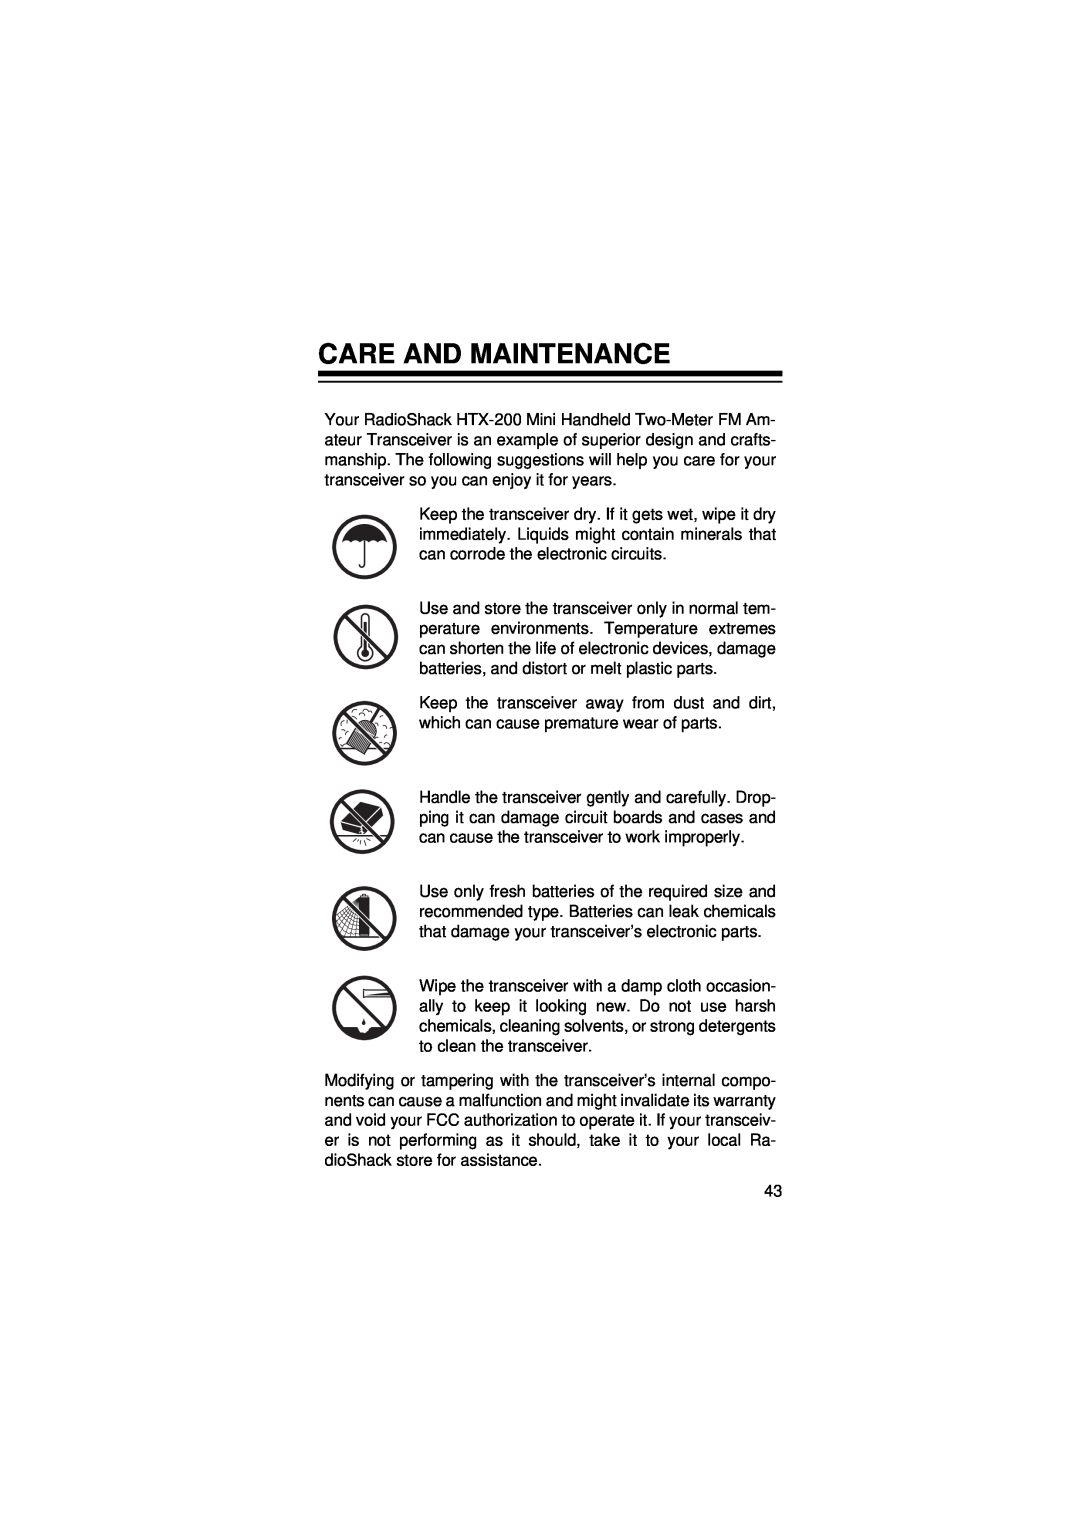 Radio Shack HTX-200 owner manual Care And Maintenance 